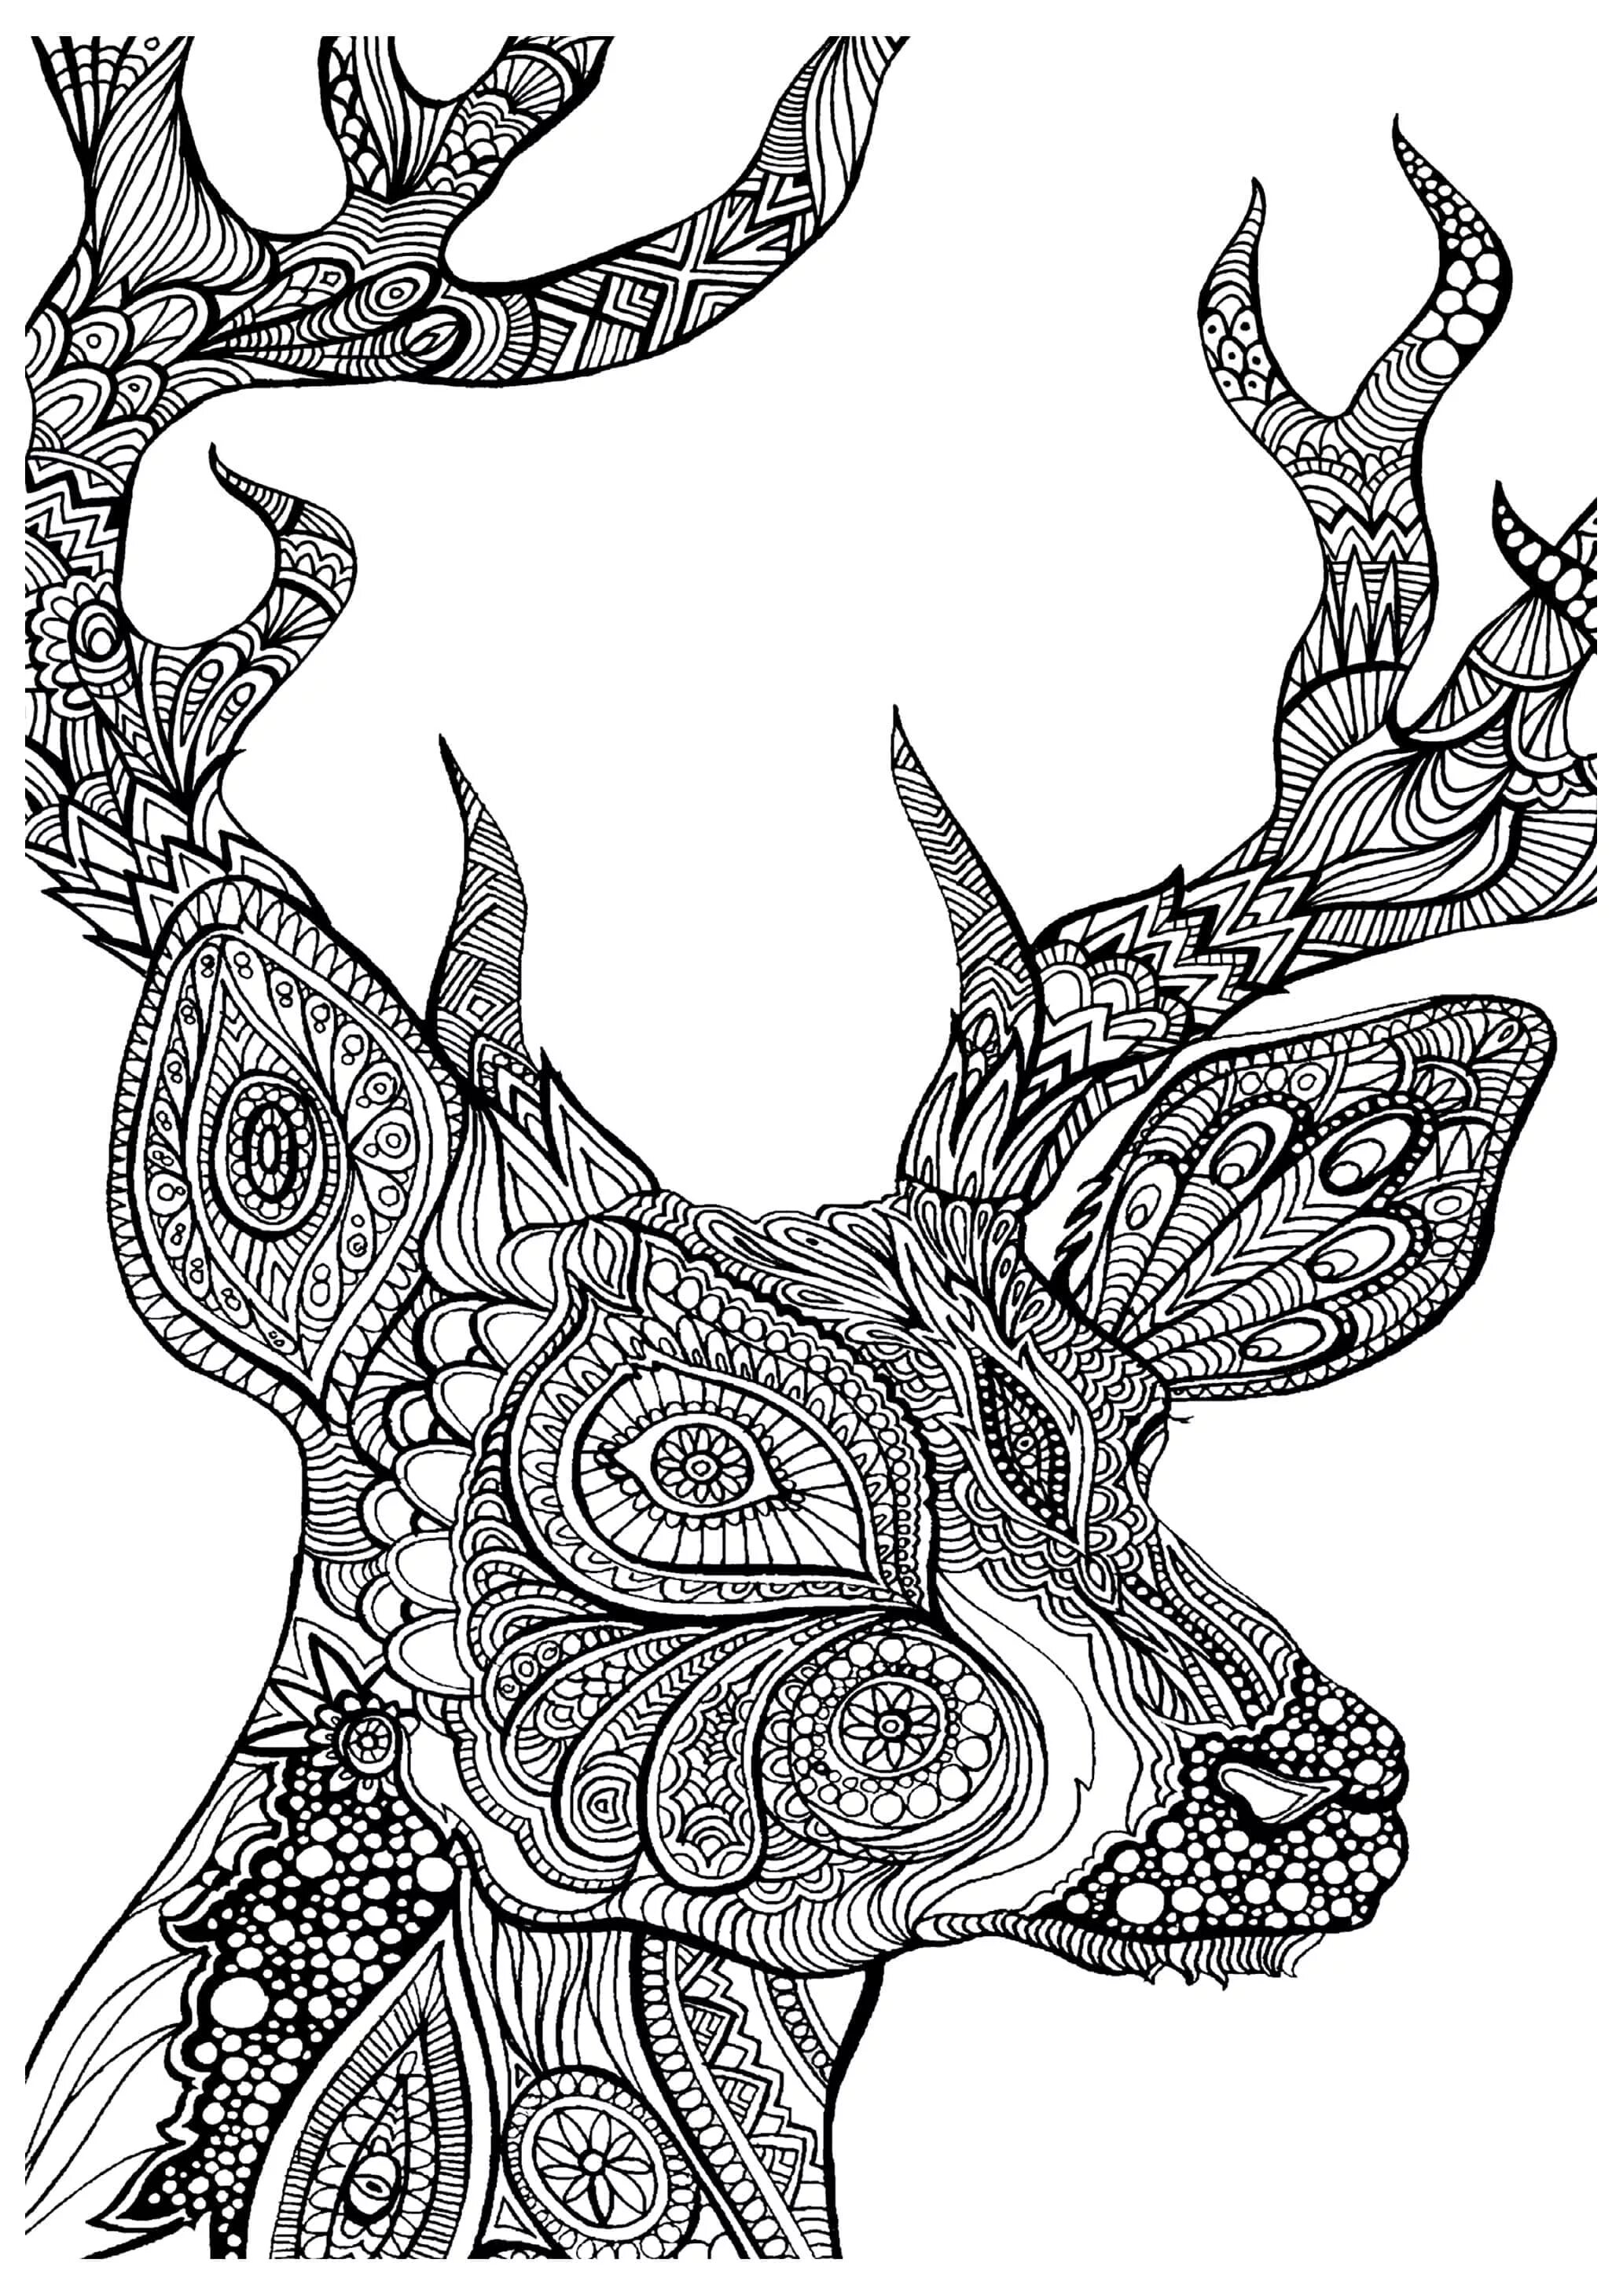 Playful animal coloring page with pattern